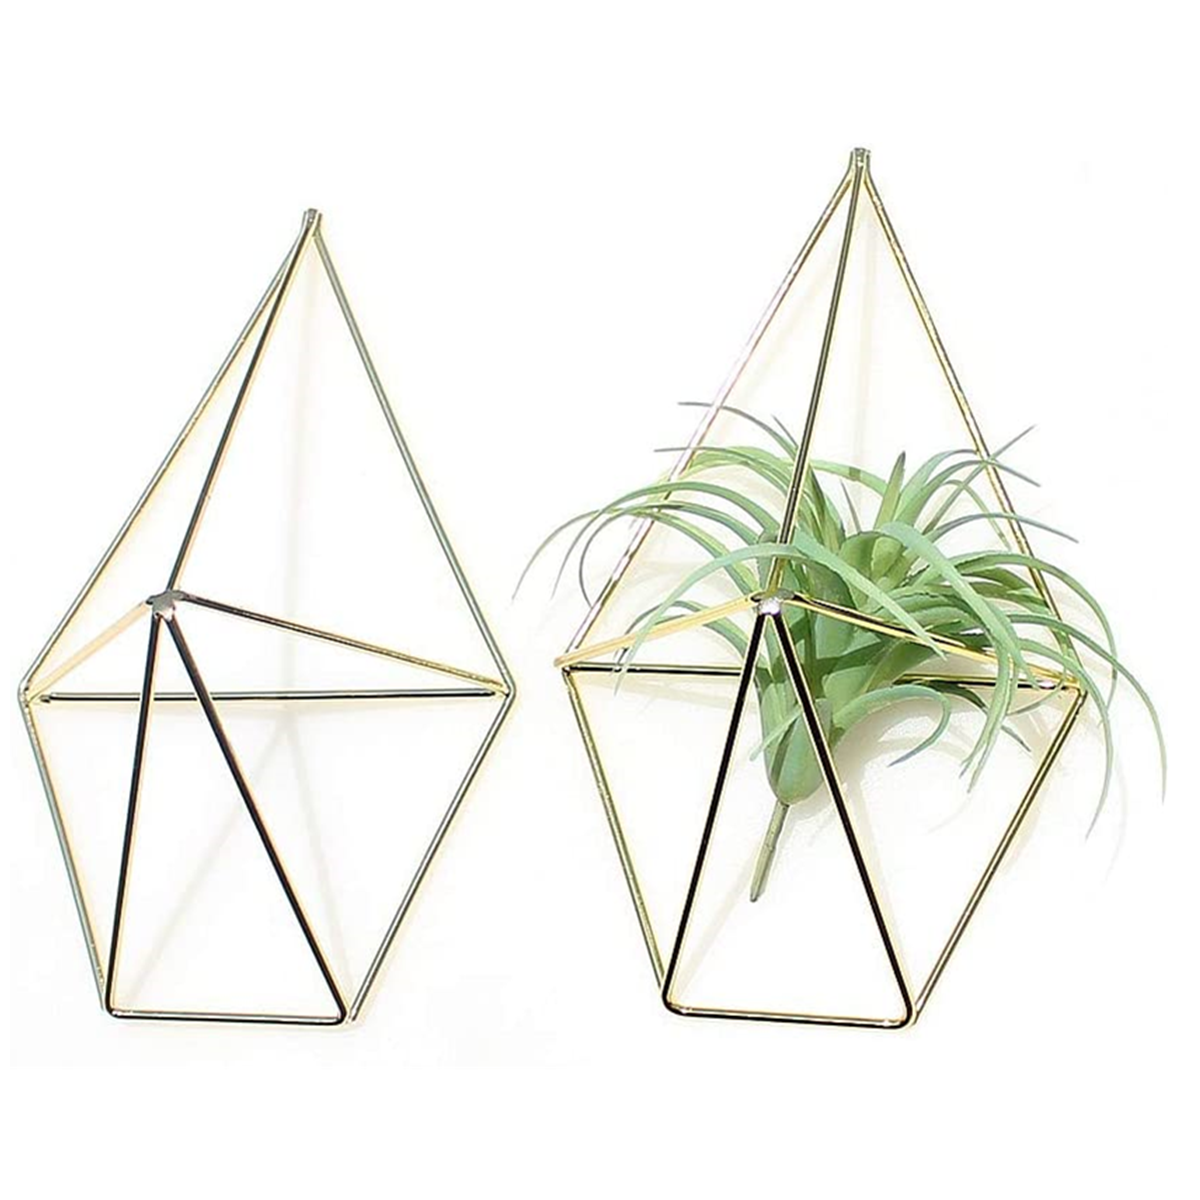 2-Pcs-Wall-Mounted-Geometric-Flower-Stand-Wall-Hanging-Wrought-Iron-Plant-Storage-Rack-Holder-Home-O-1736564-6